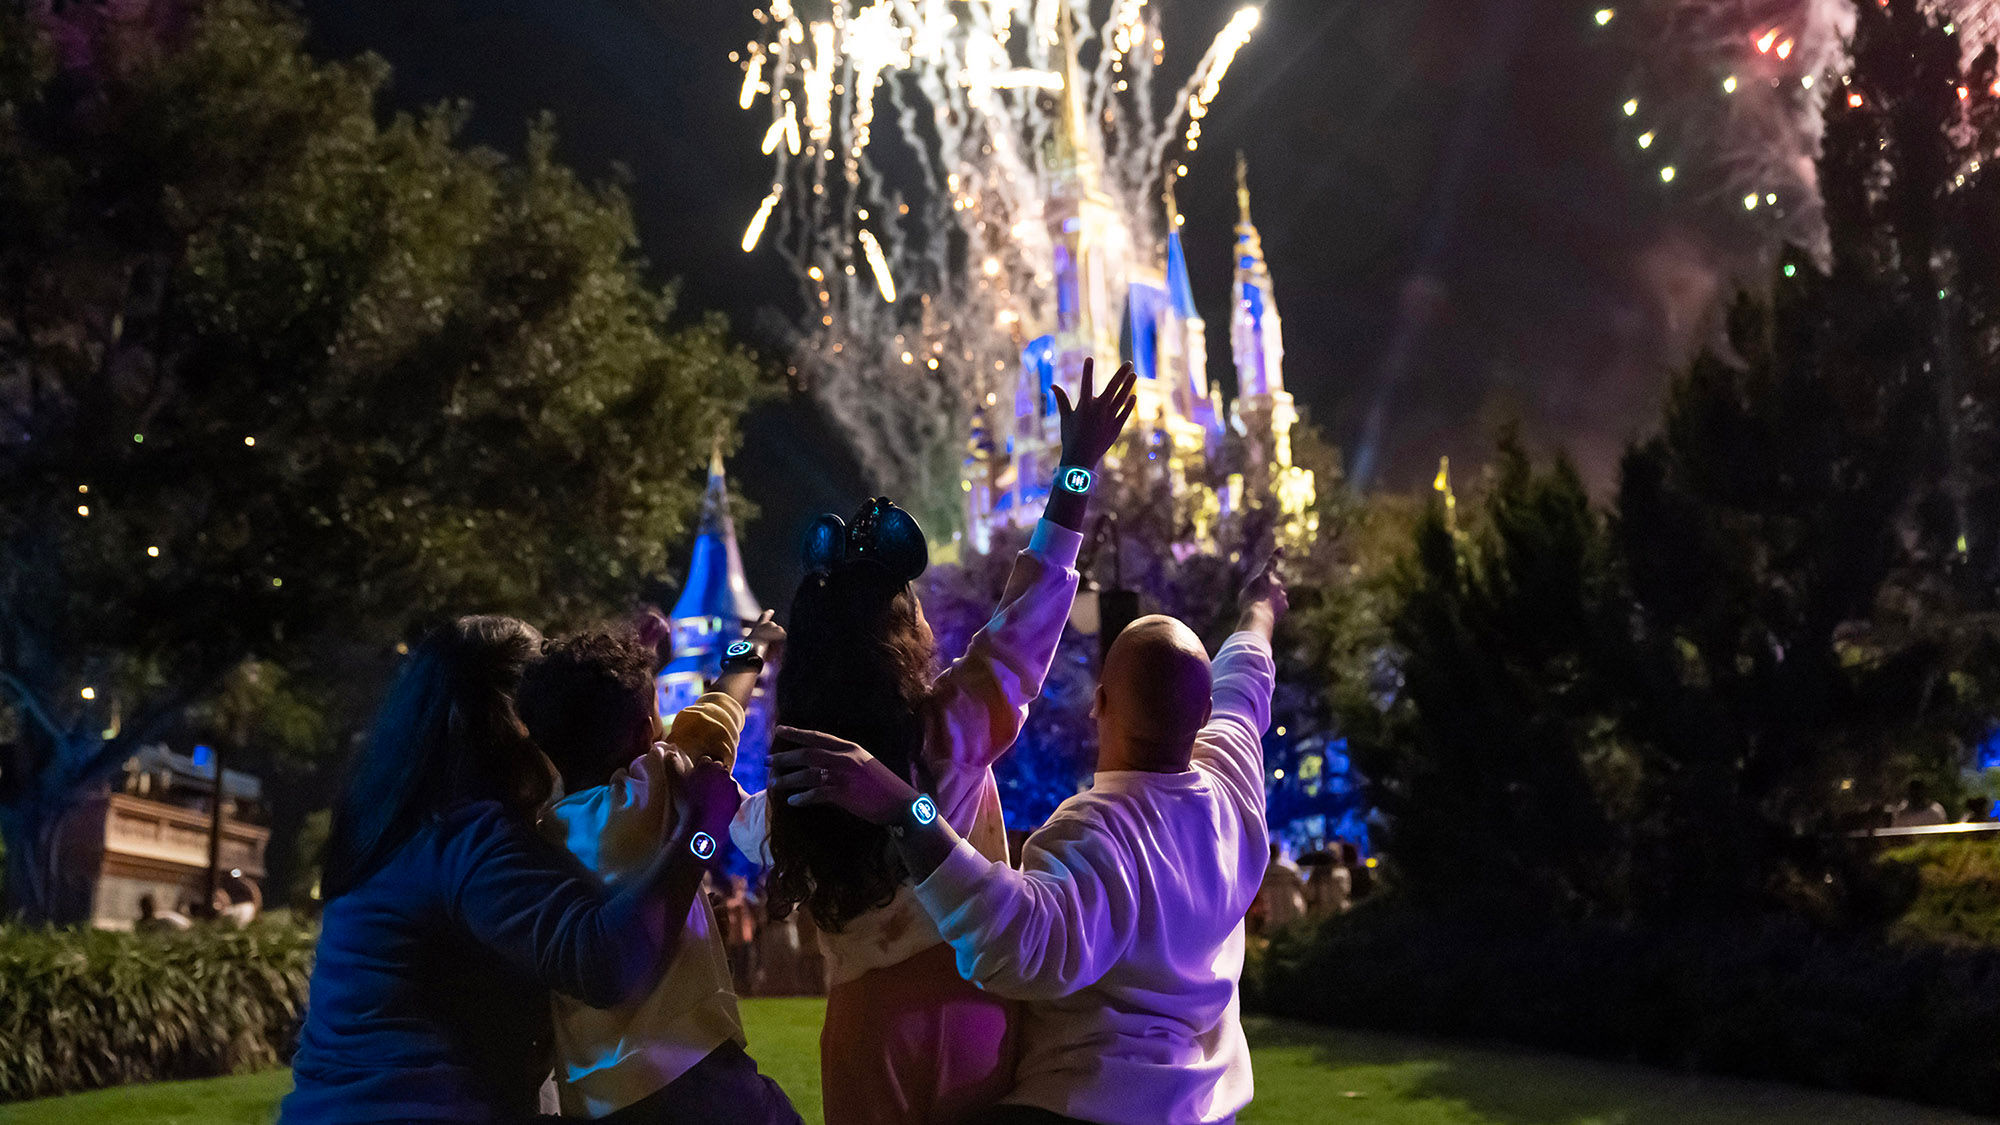 MagicBand+ will interact with nighttime shows at the Walt Disney World Resort.